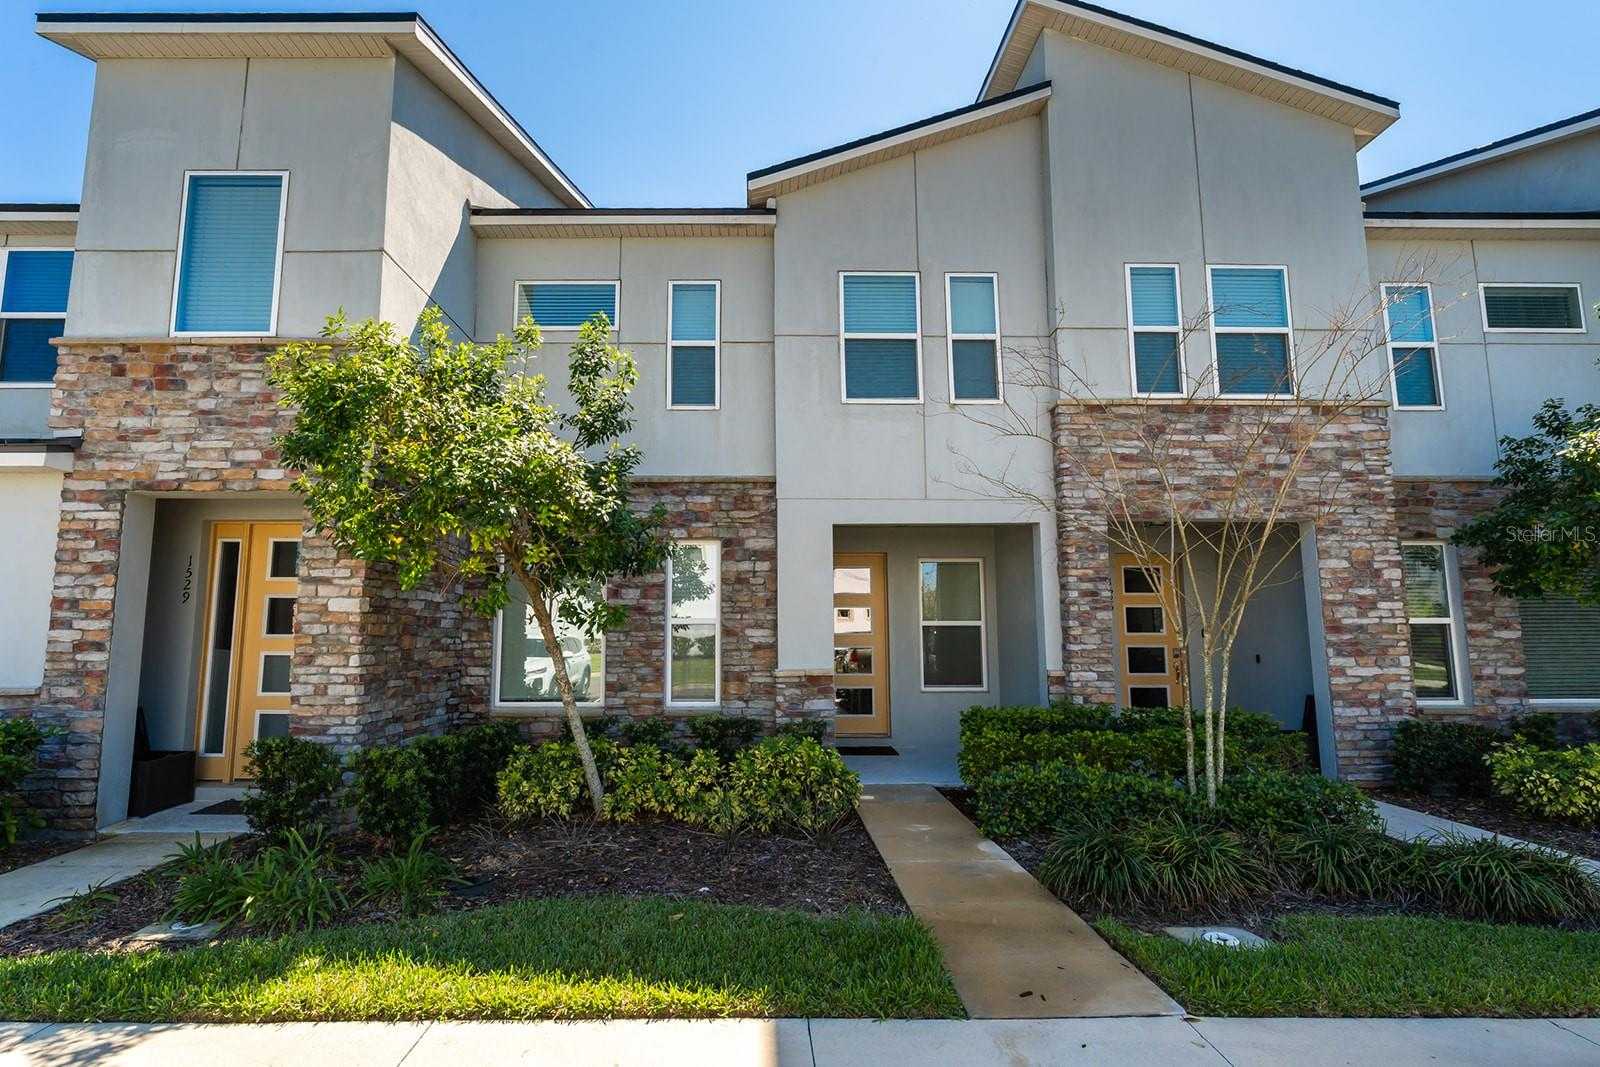 Photo 1 of 25 of 1527 CAREY PALM CIRCLE townhome